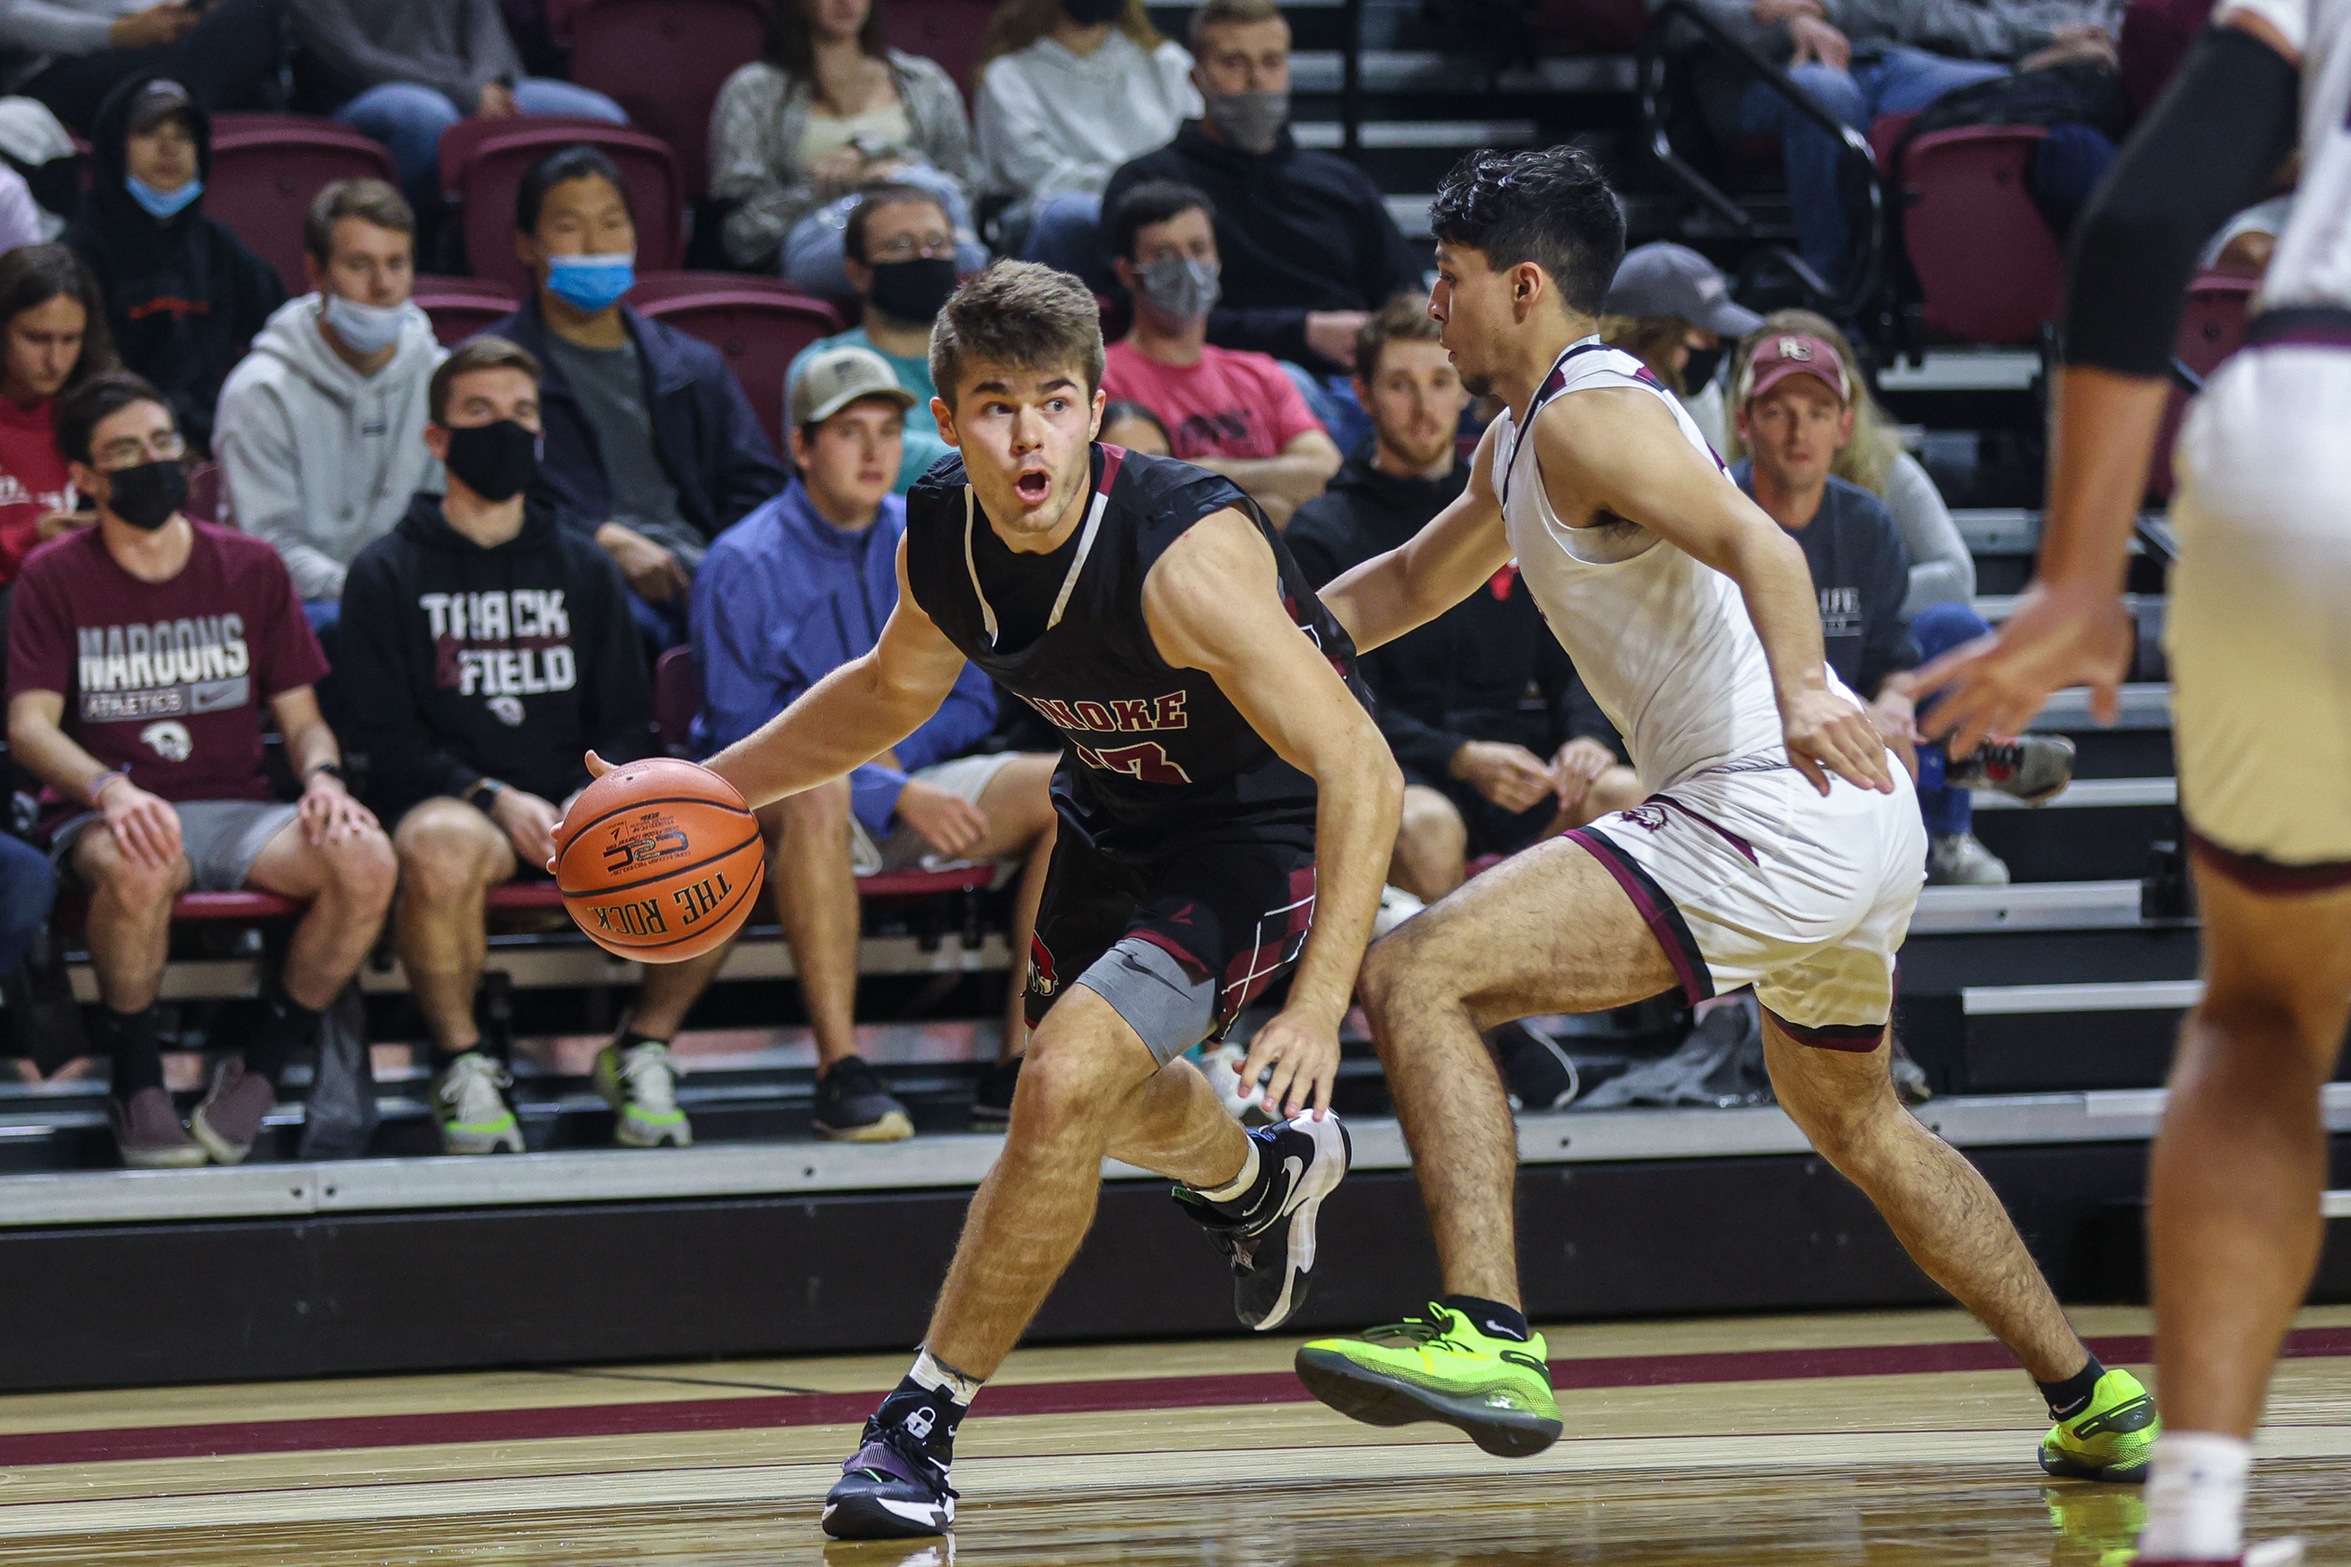 Marcus Morgan's Double-Double Leads Maroons to Win Over Whitworth, 89-86